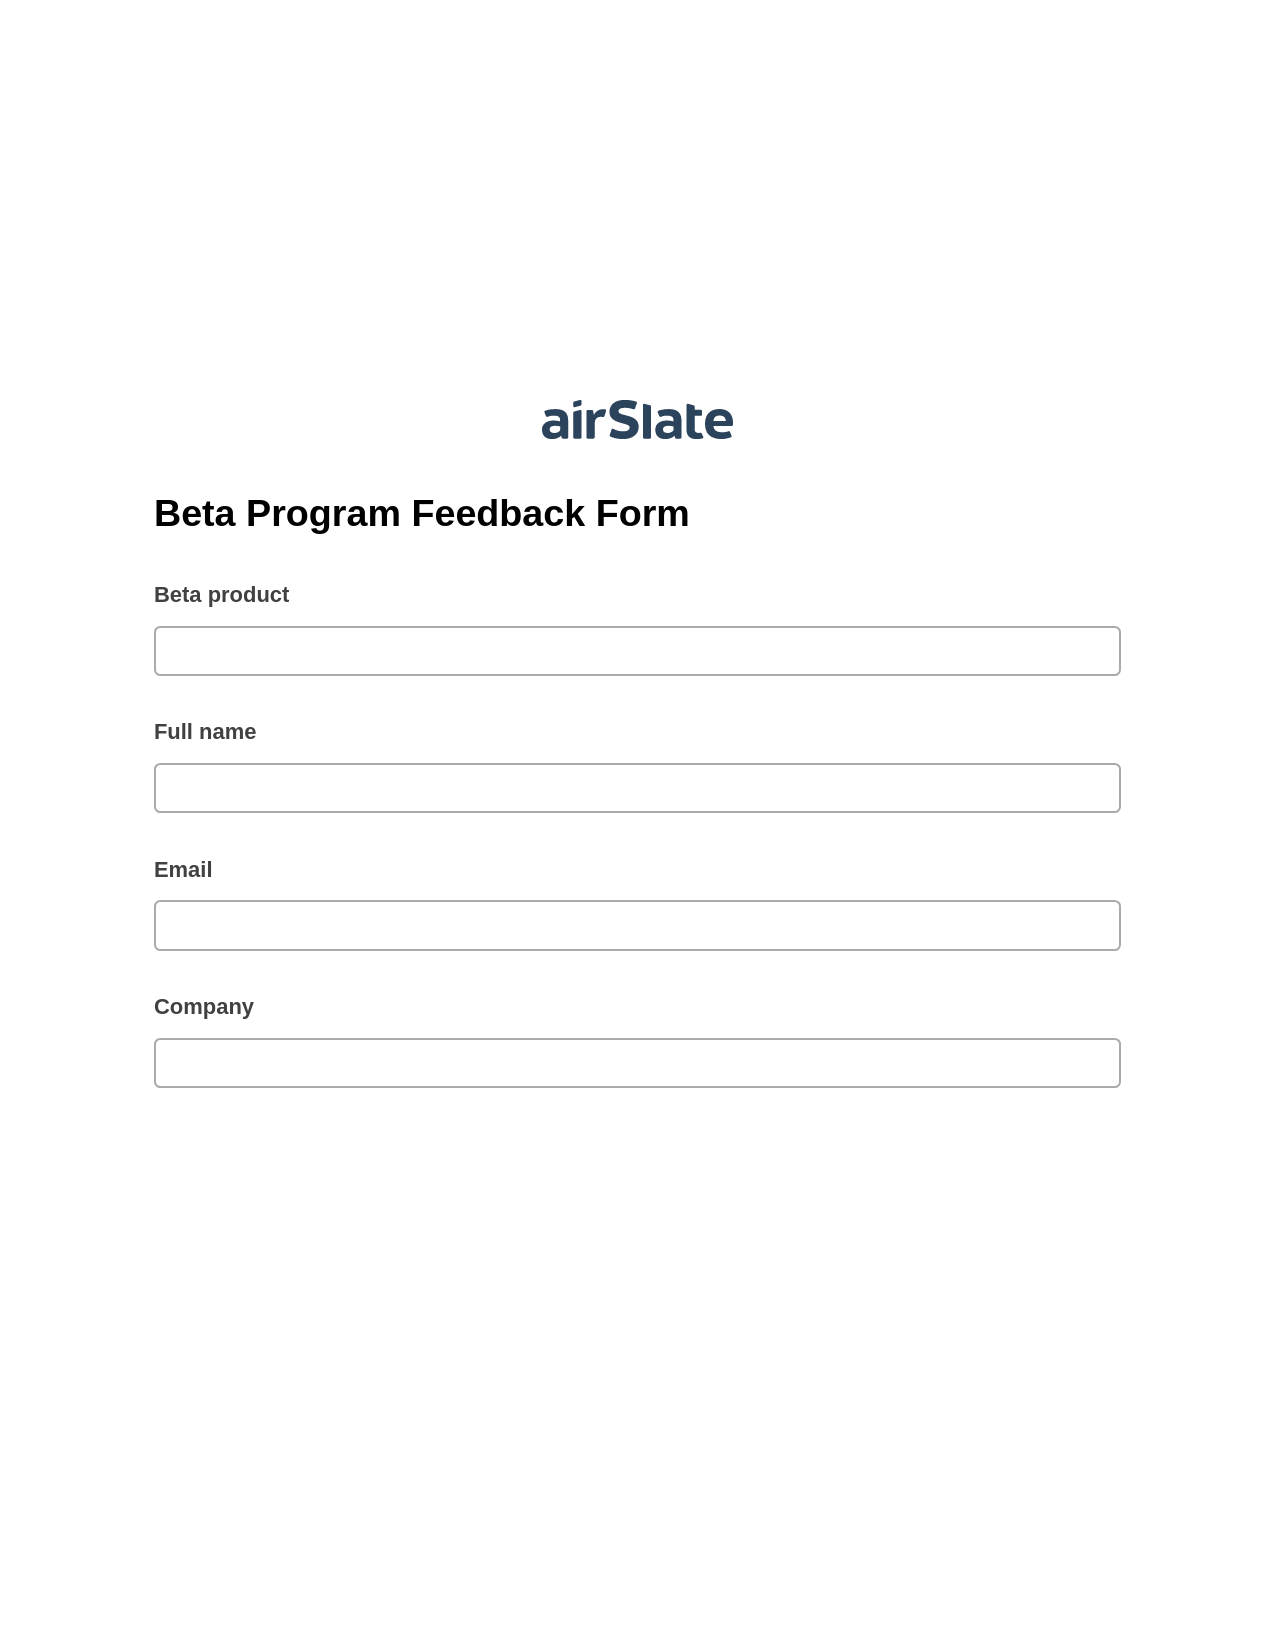 Beta Program Feedback Form Pre-fill from Excel Spreadsheet Bot, Set Signature Type Bot, Export to NetSuite Record Bot